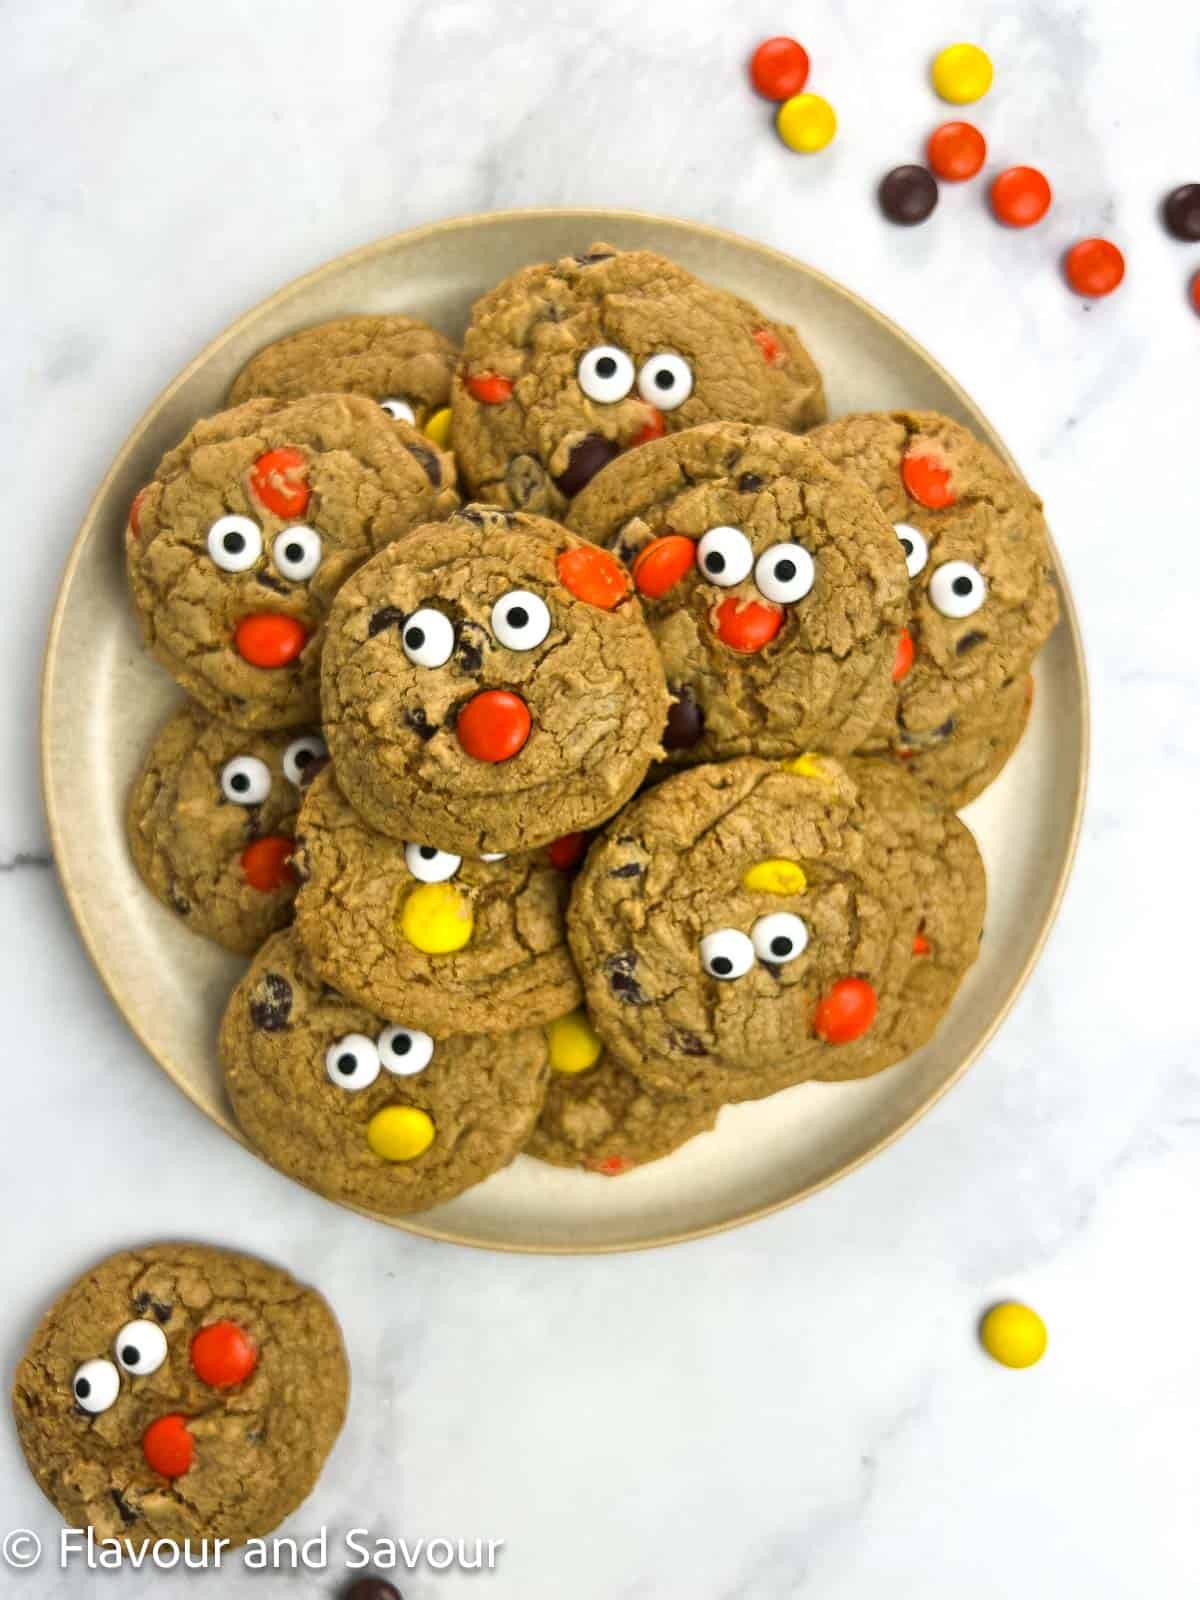 A plateful of gluten-free cookies with Reese's Pieces, chocolate chips and edible monster eyeballs for Halloween.